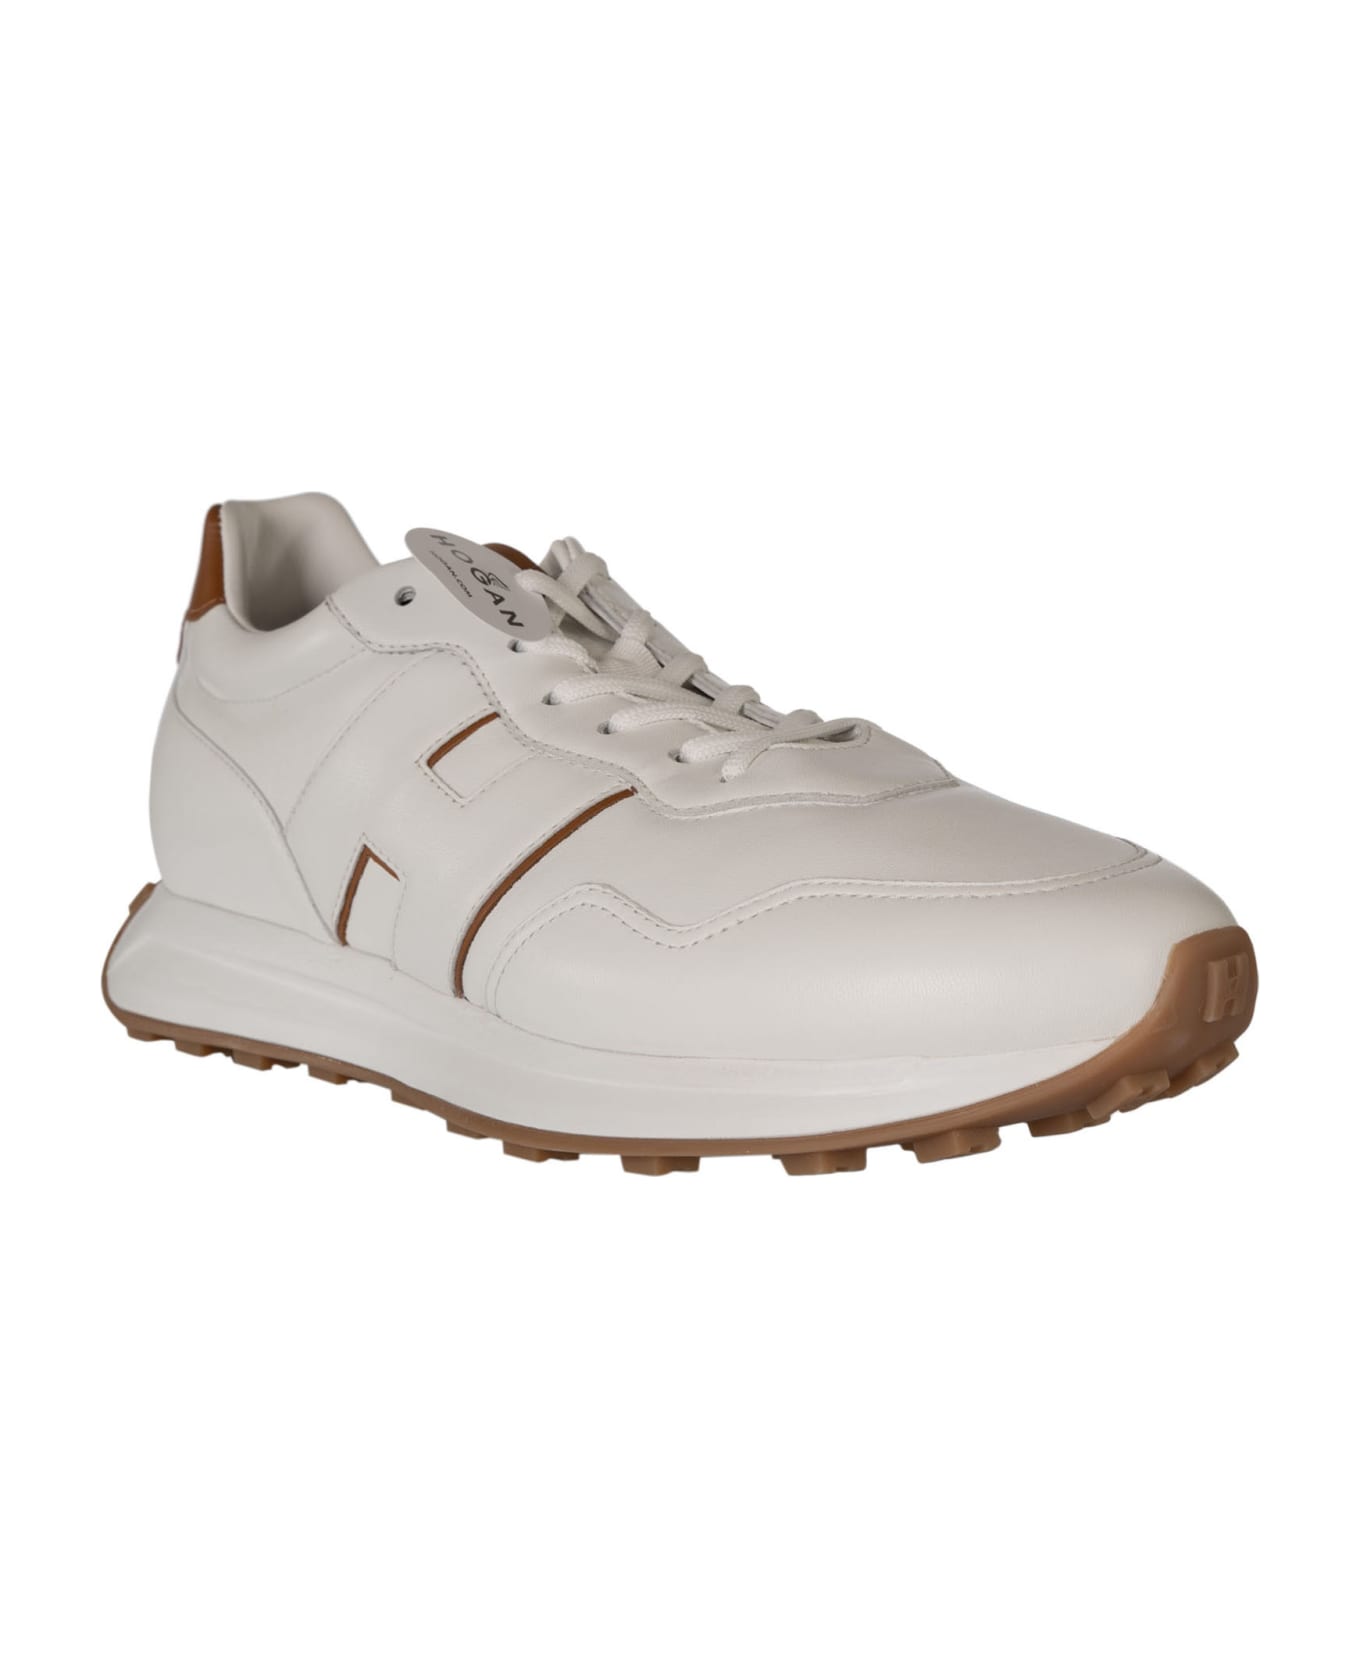 Hogan H601 H Patch Sneakers - White